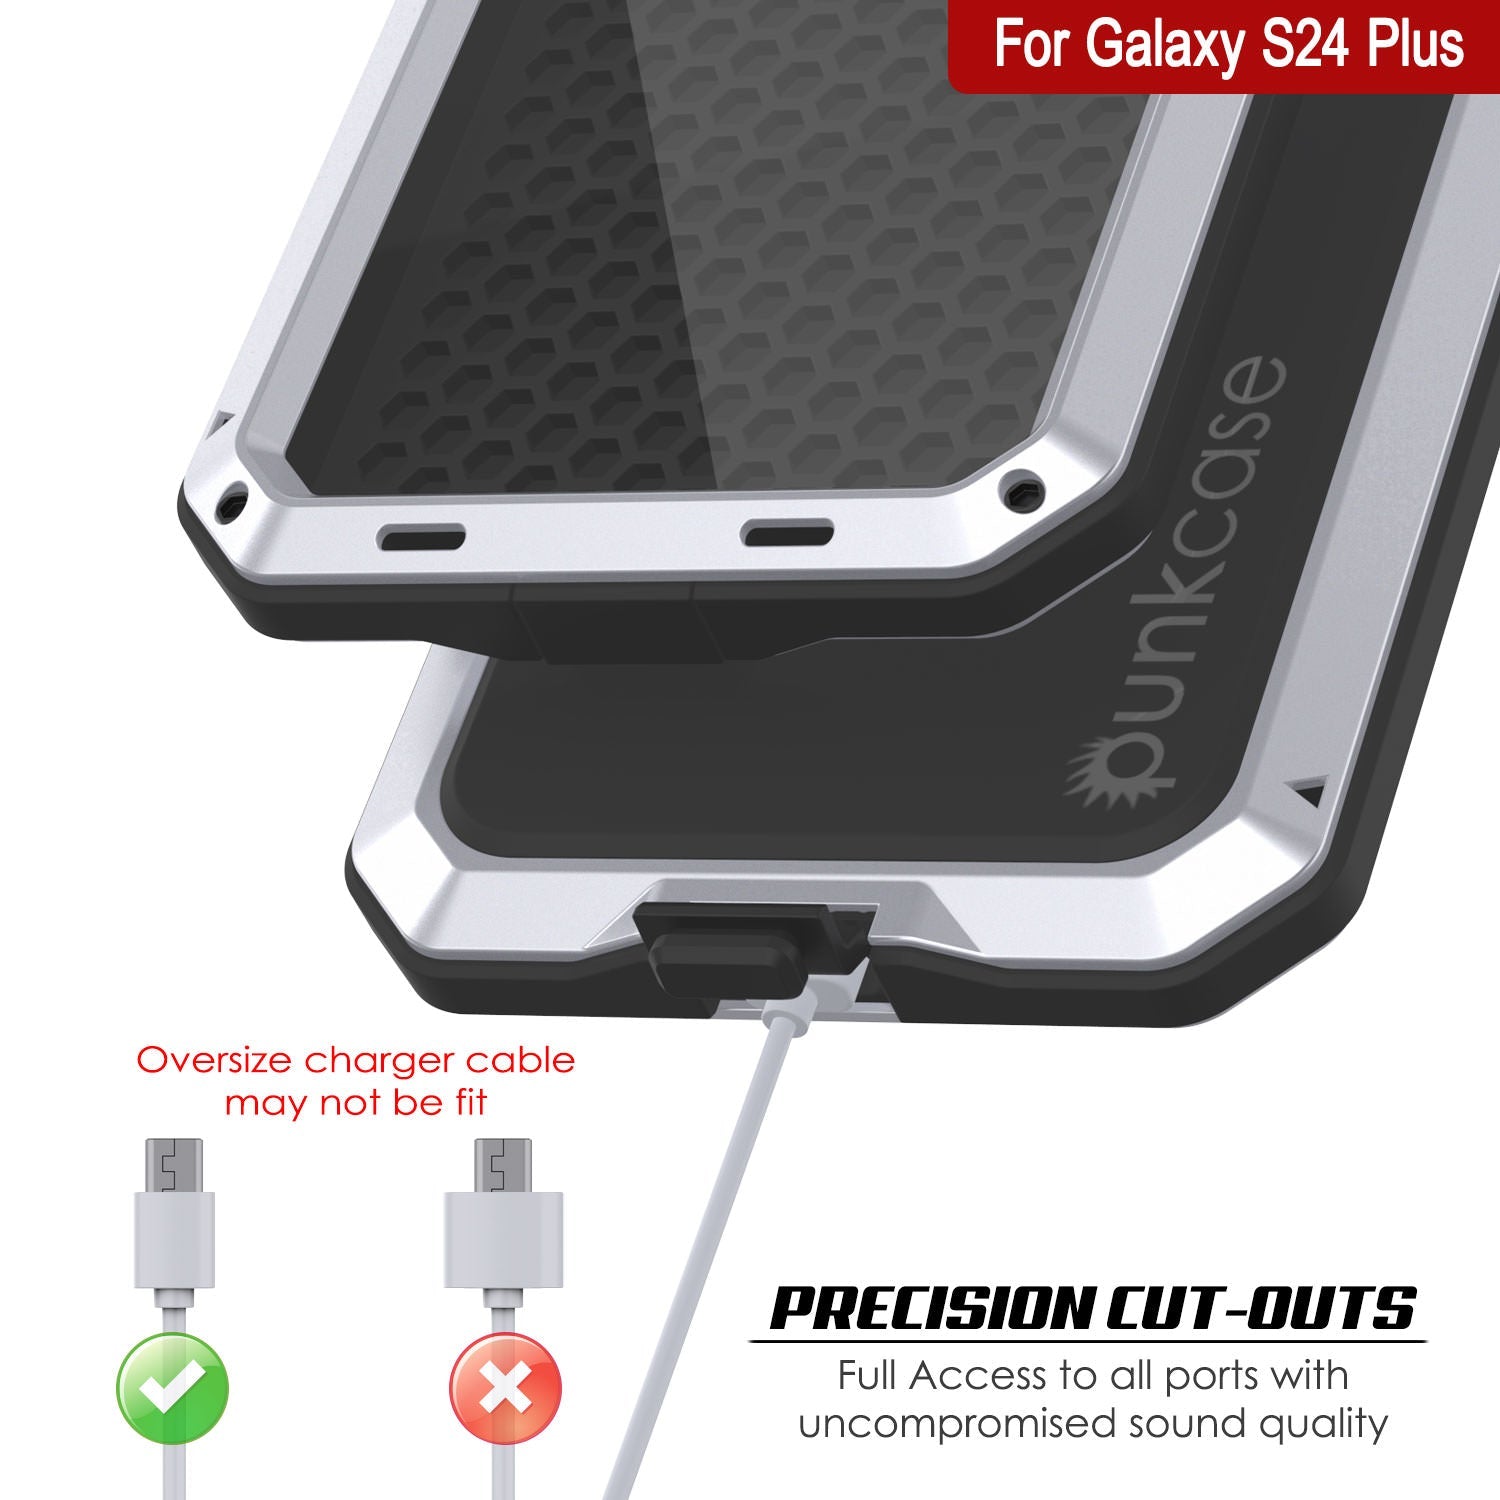 Galaxy S24 Plus Metal Case, Heavy Duty Military Grade Armor Cover [shock proof] Full Body Hard [White]